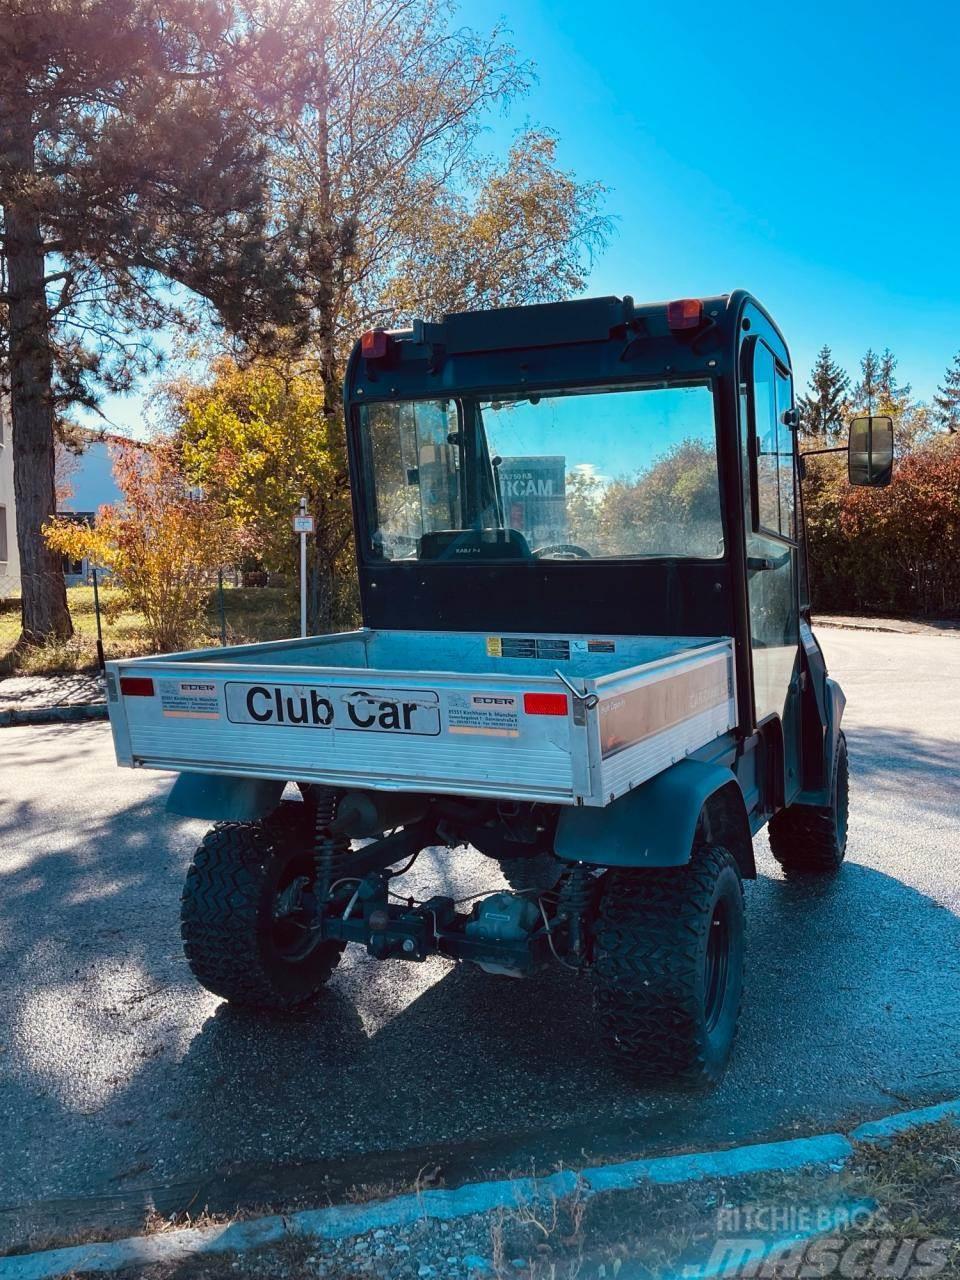  Carryall Club Car Other groundcare machines